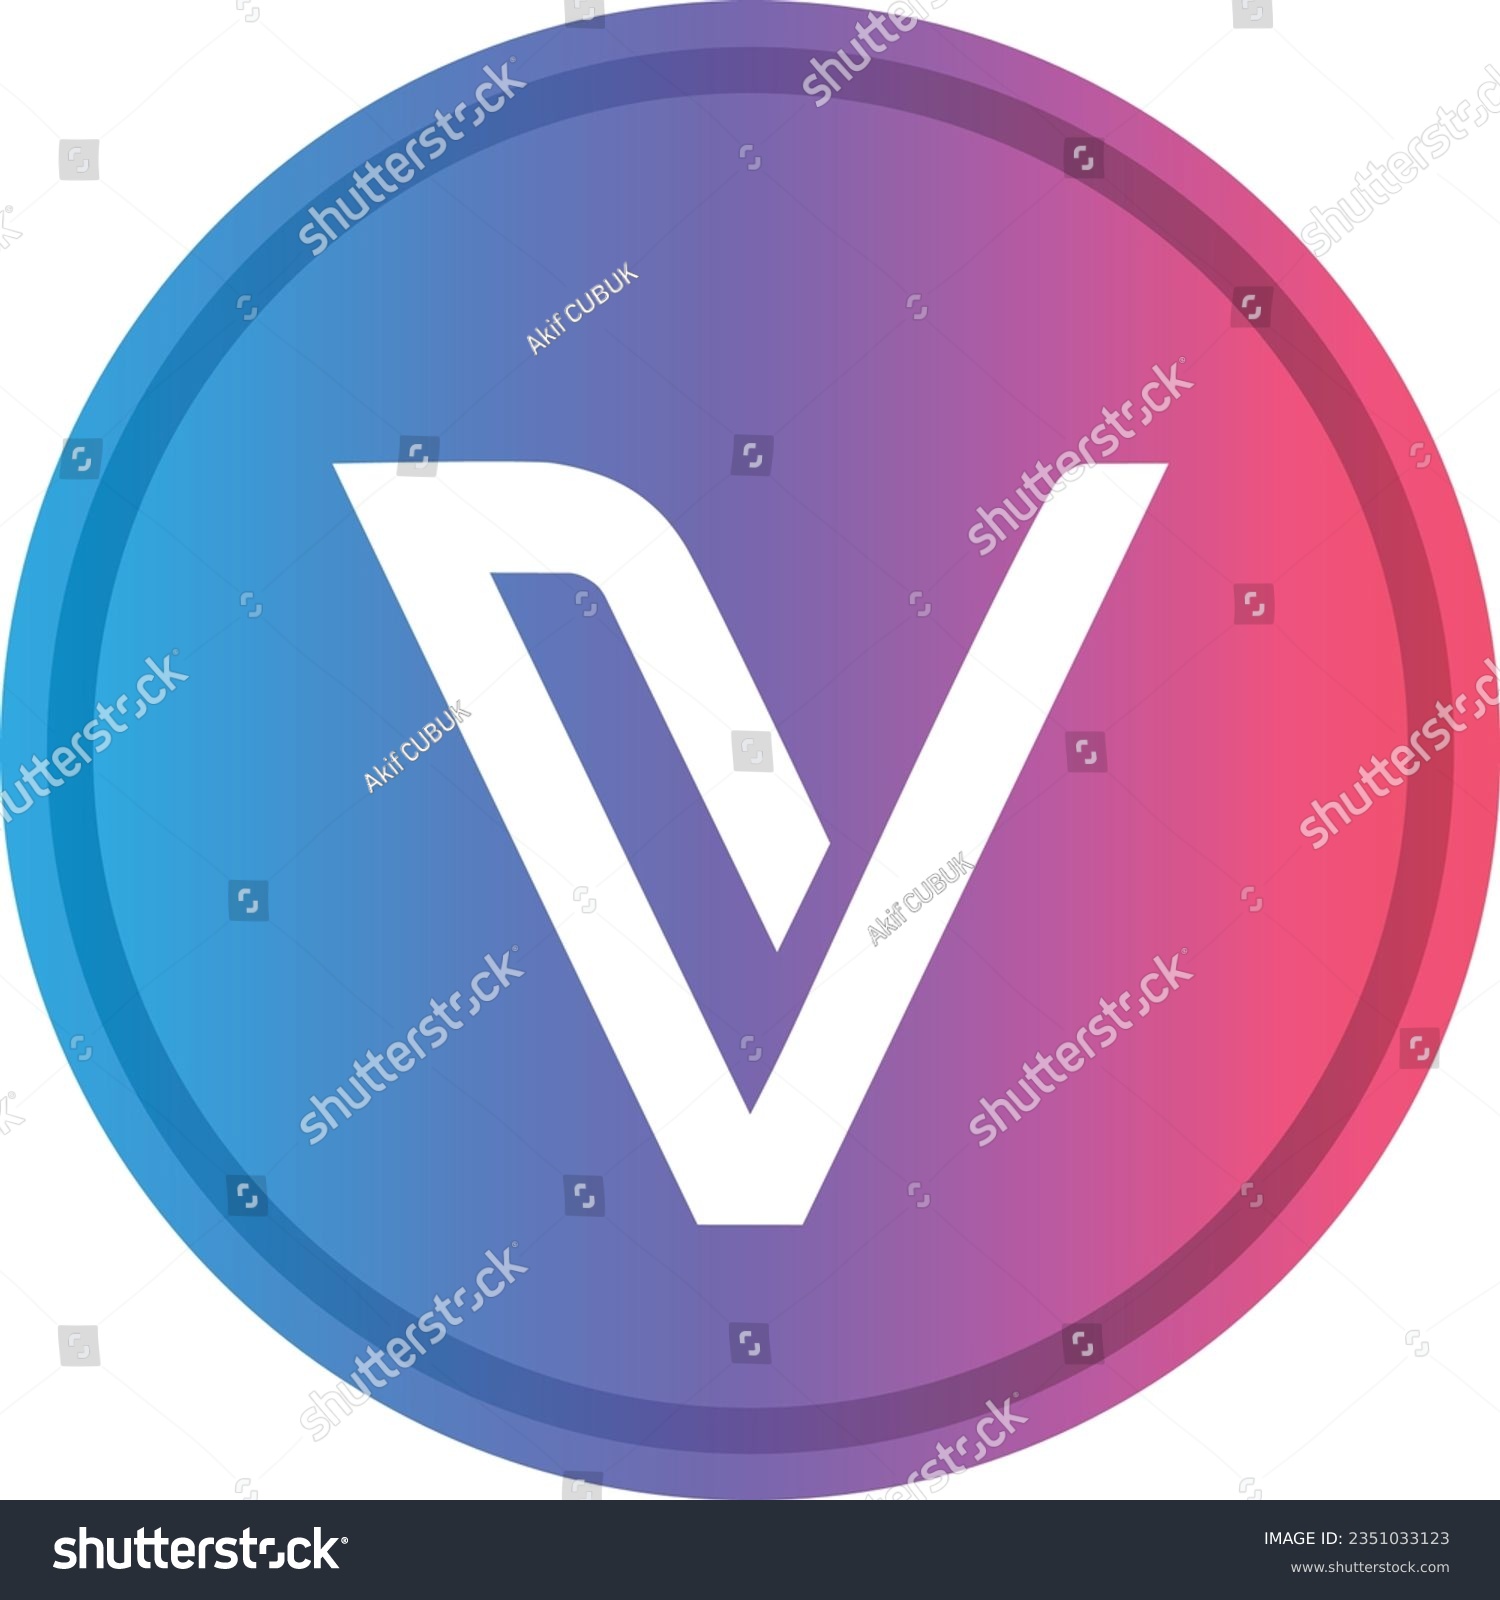 SVG of Cryptocurrency logos in colorful circle. vector logo images. 3d illustrations. svg